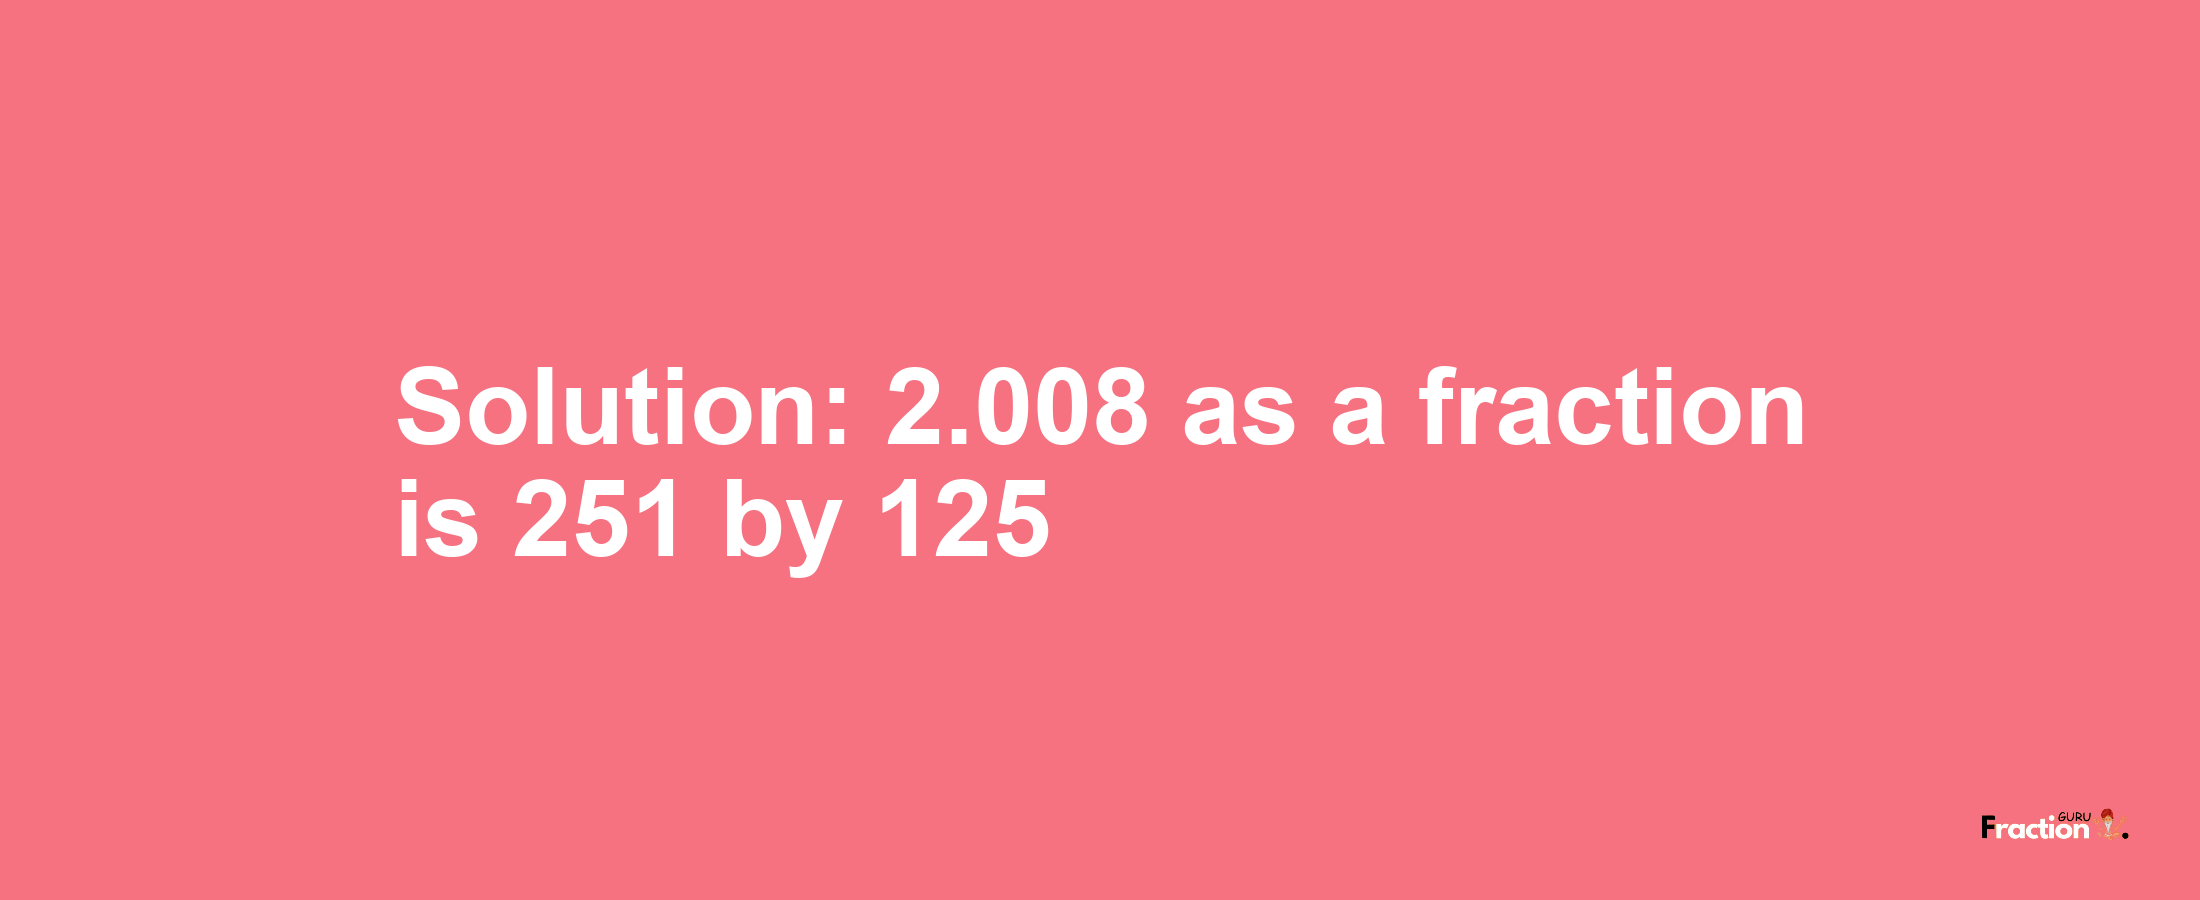 Solution:2.008 as a fraction is 251/125